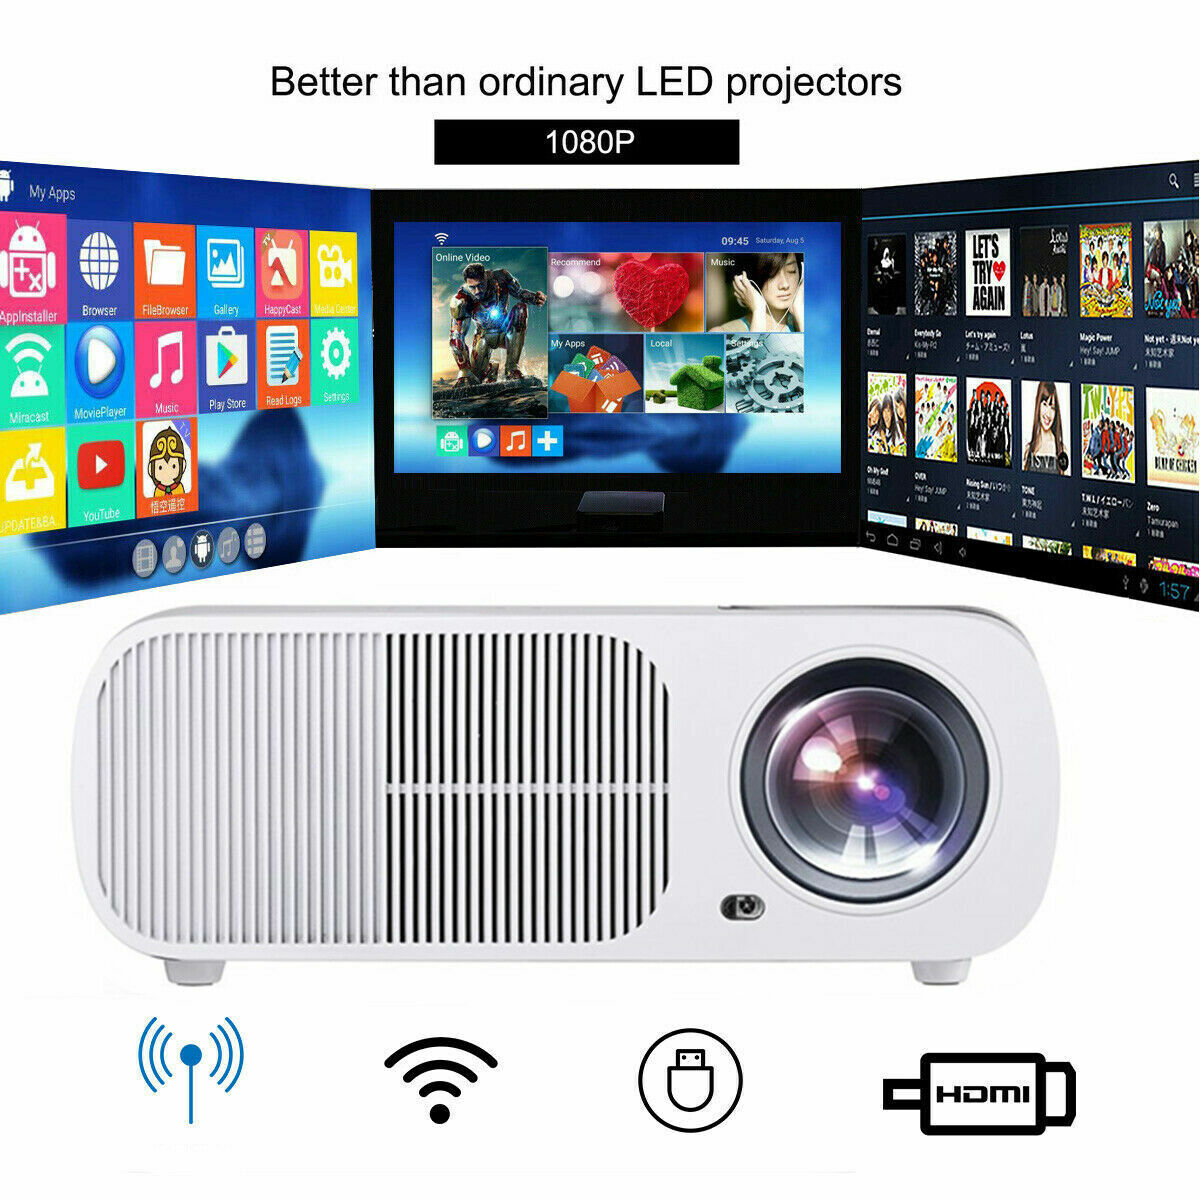 LESHP BL20 1080p HP 2600 LM LED Video Projector, White (READ LISTING) - GC